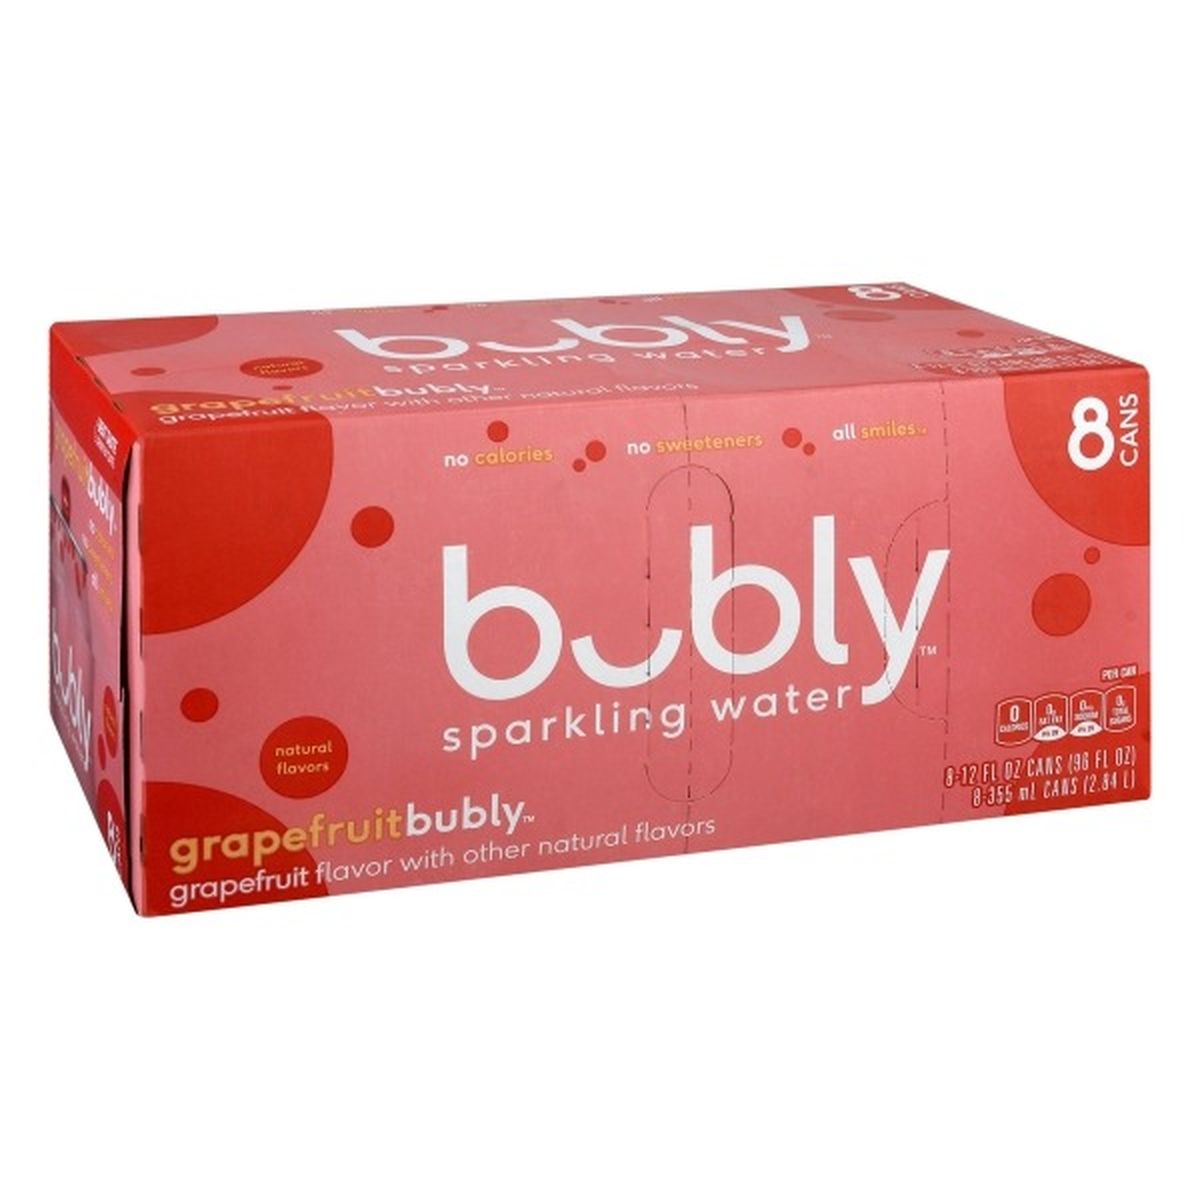 Calories in bubly Sparkling Water, Grapefruit